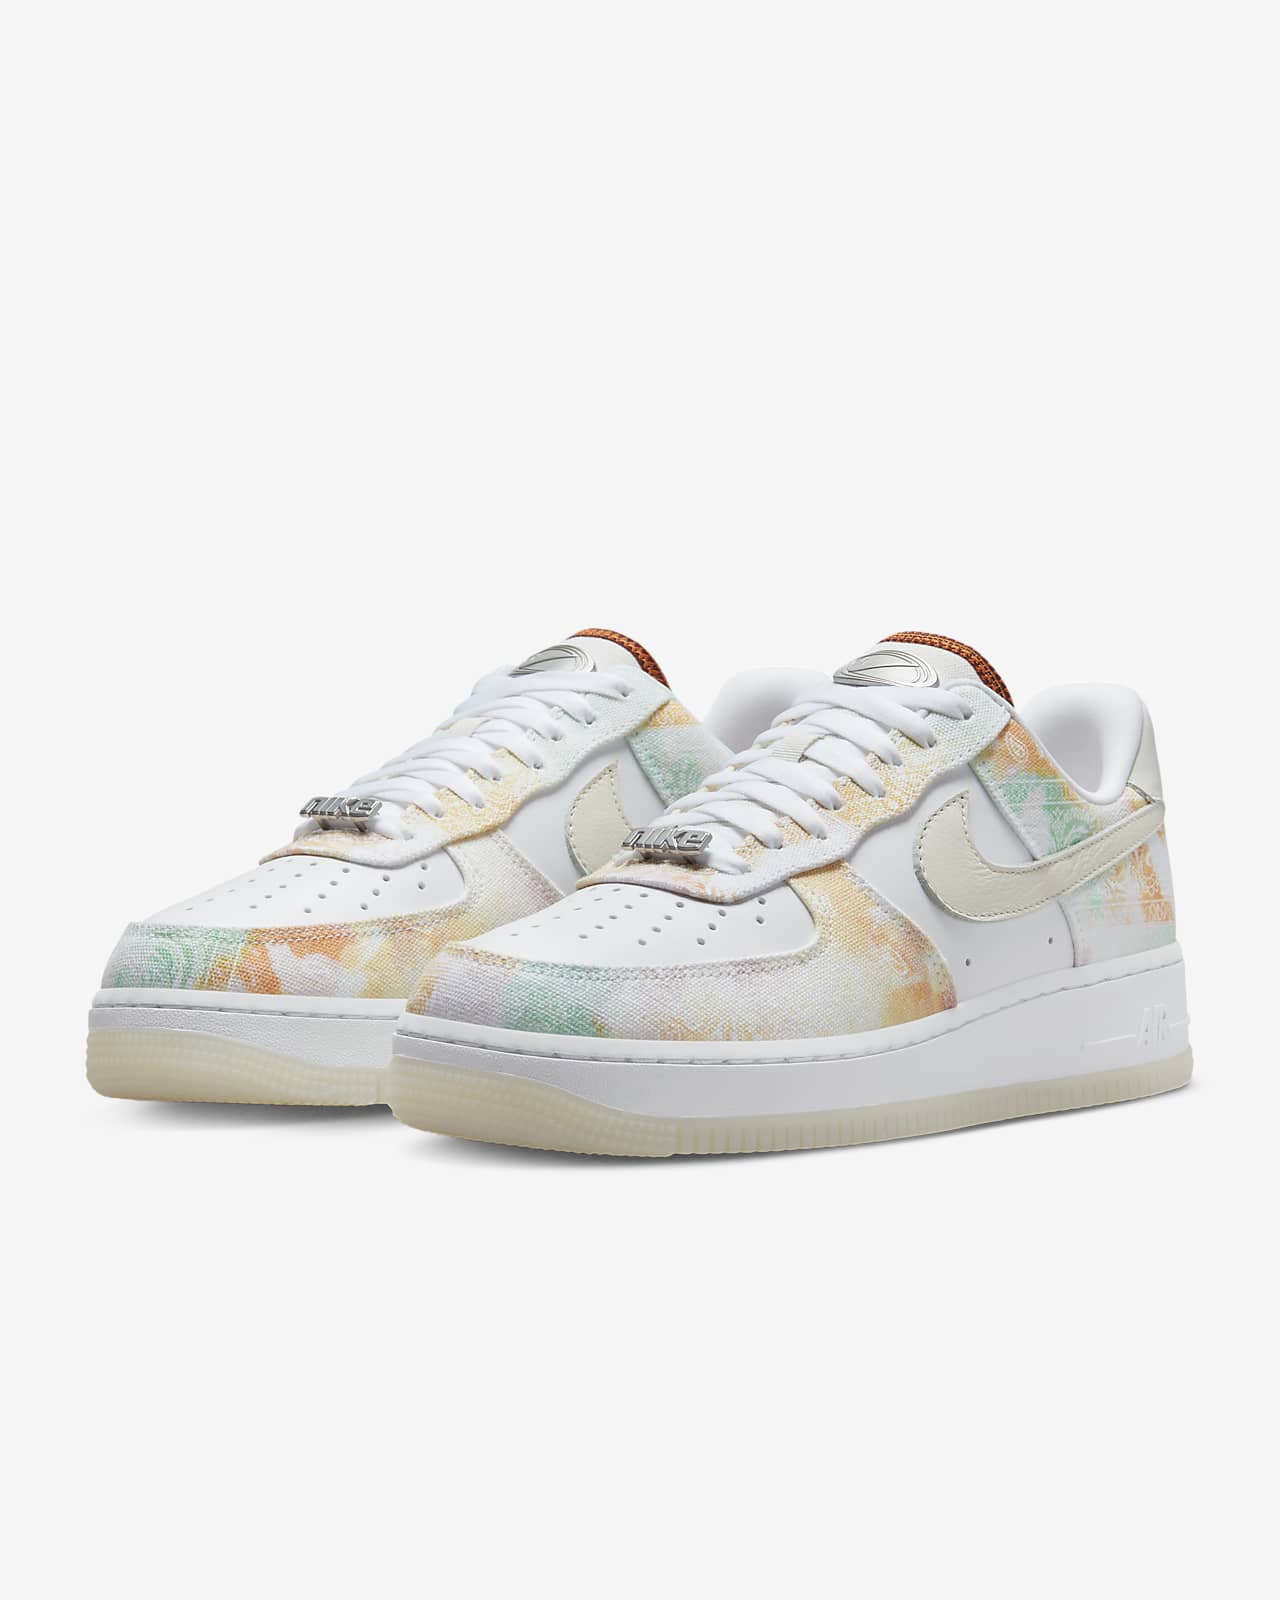 Nike Women's Air Force 1 '07 Lifestyle Shoe